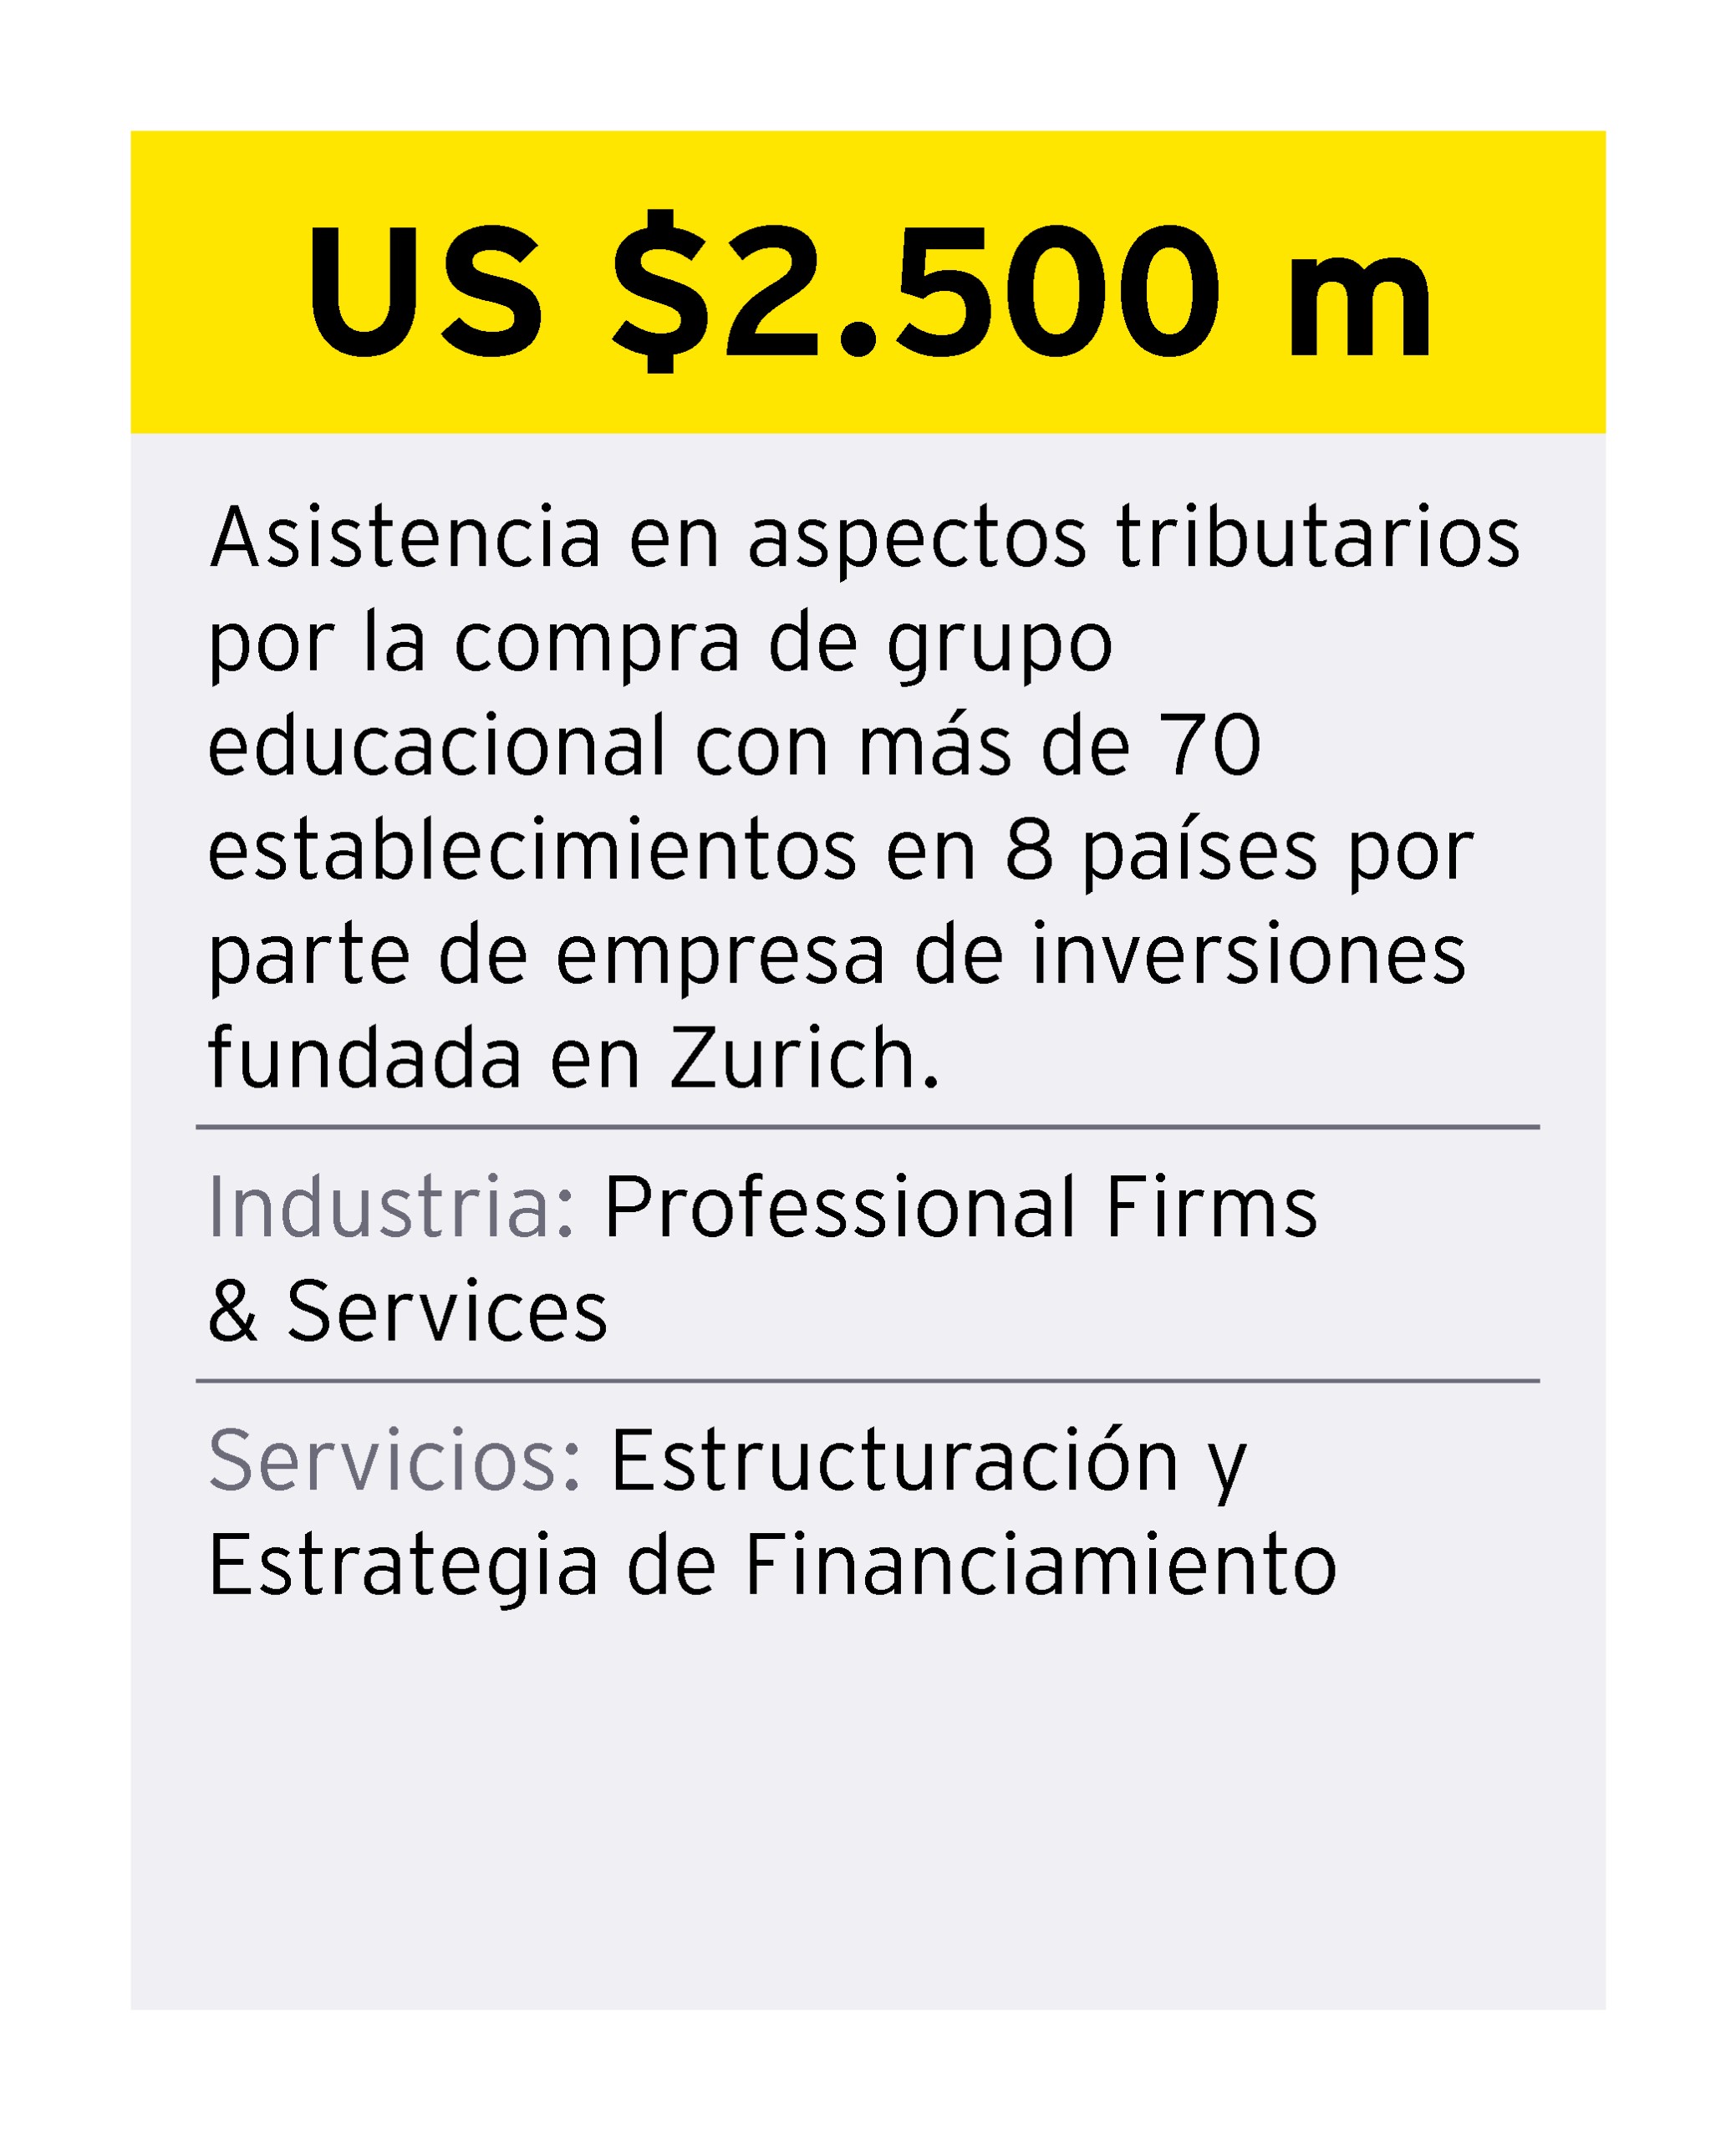 ey-chile-credencial-1-services